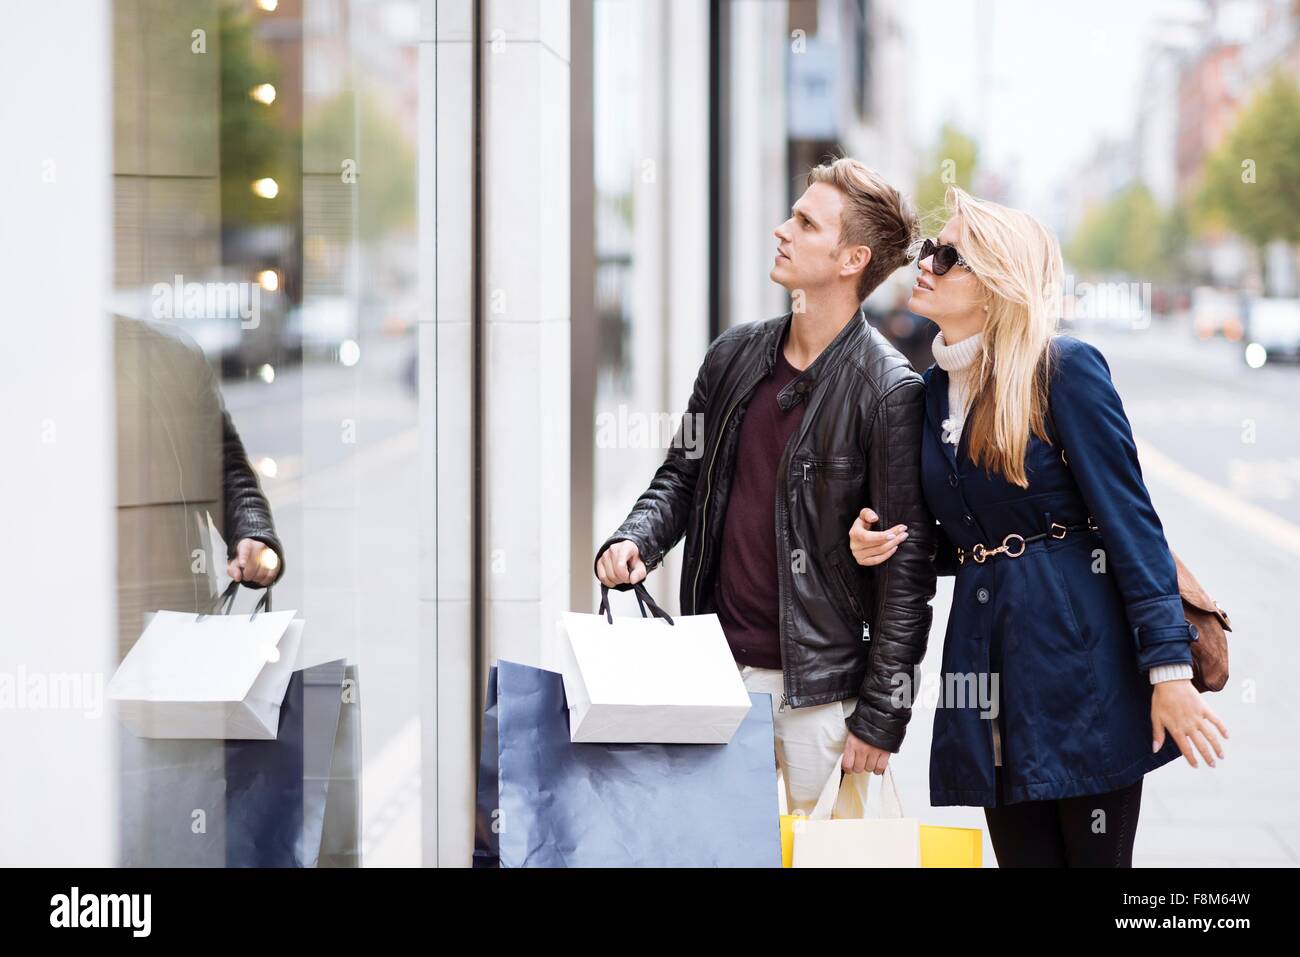 Young couple window shopping, Londres, Angleterre, Royaume-Uni Banque D'Images